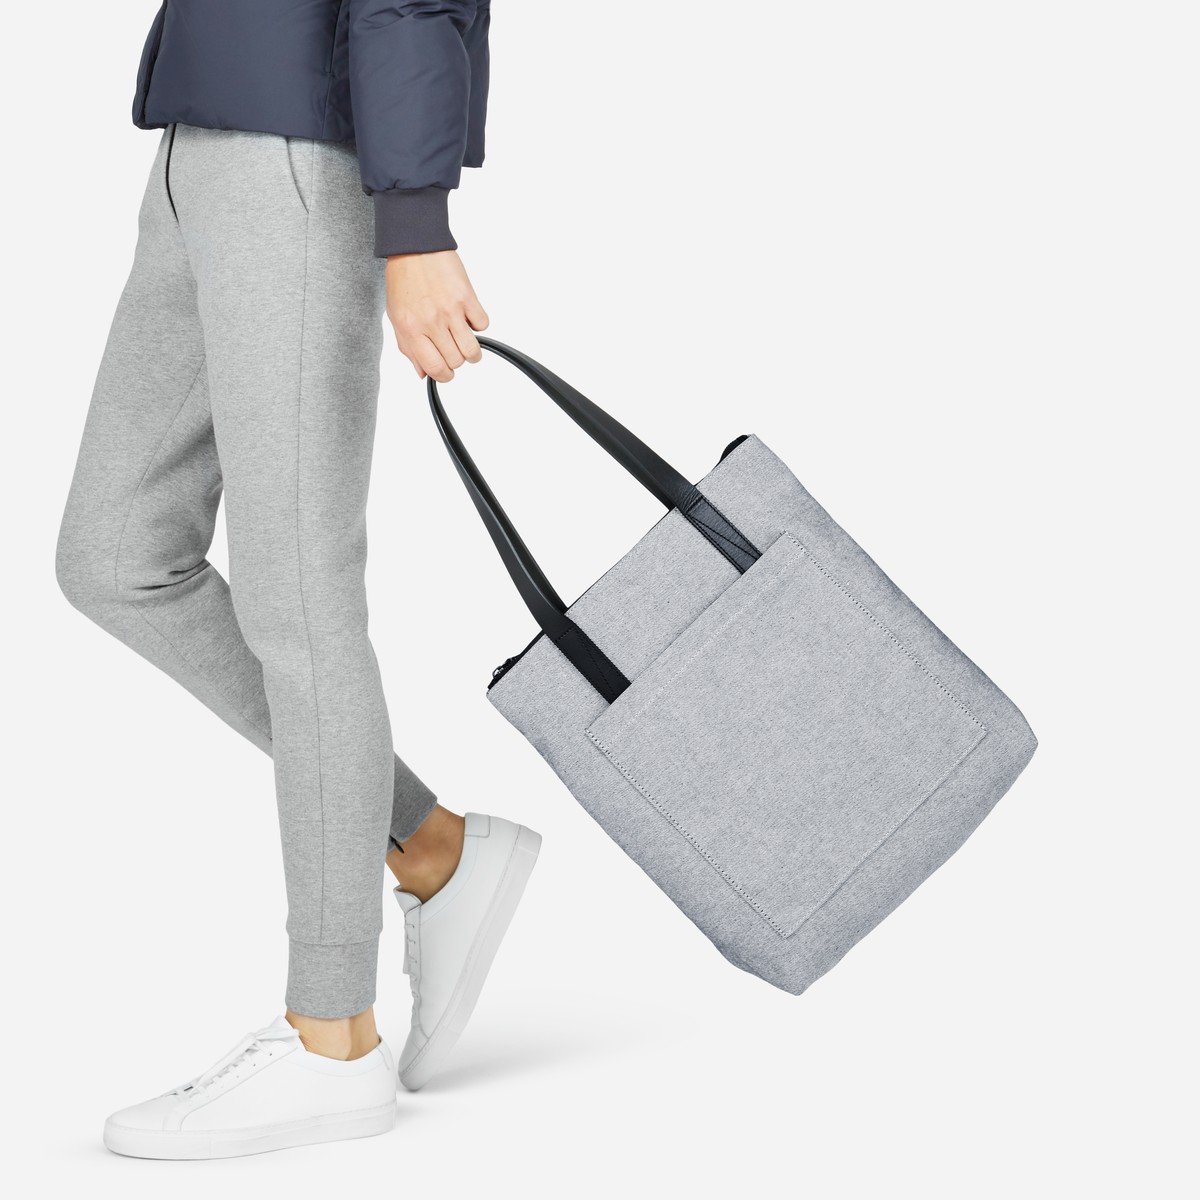 Everlane Review Dipped Zip Tote {Updated Feb 2018} — Fairly Curated